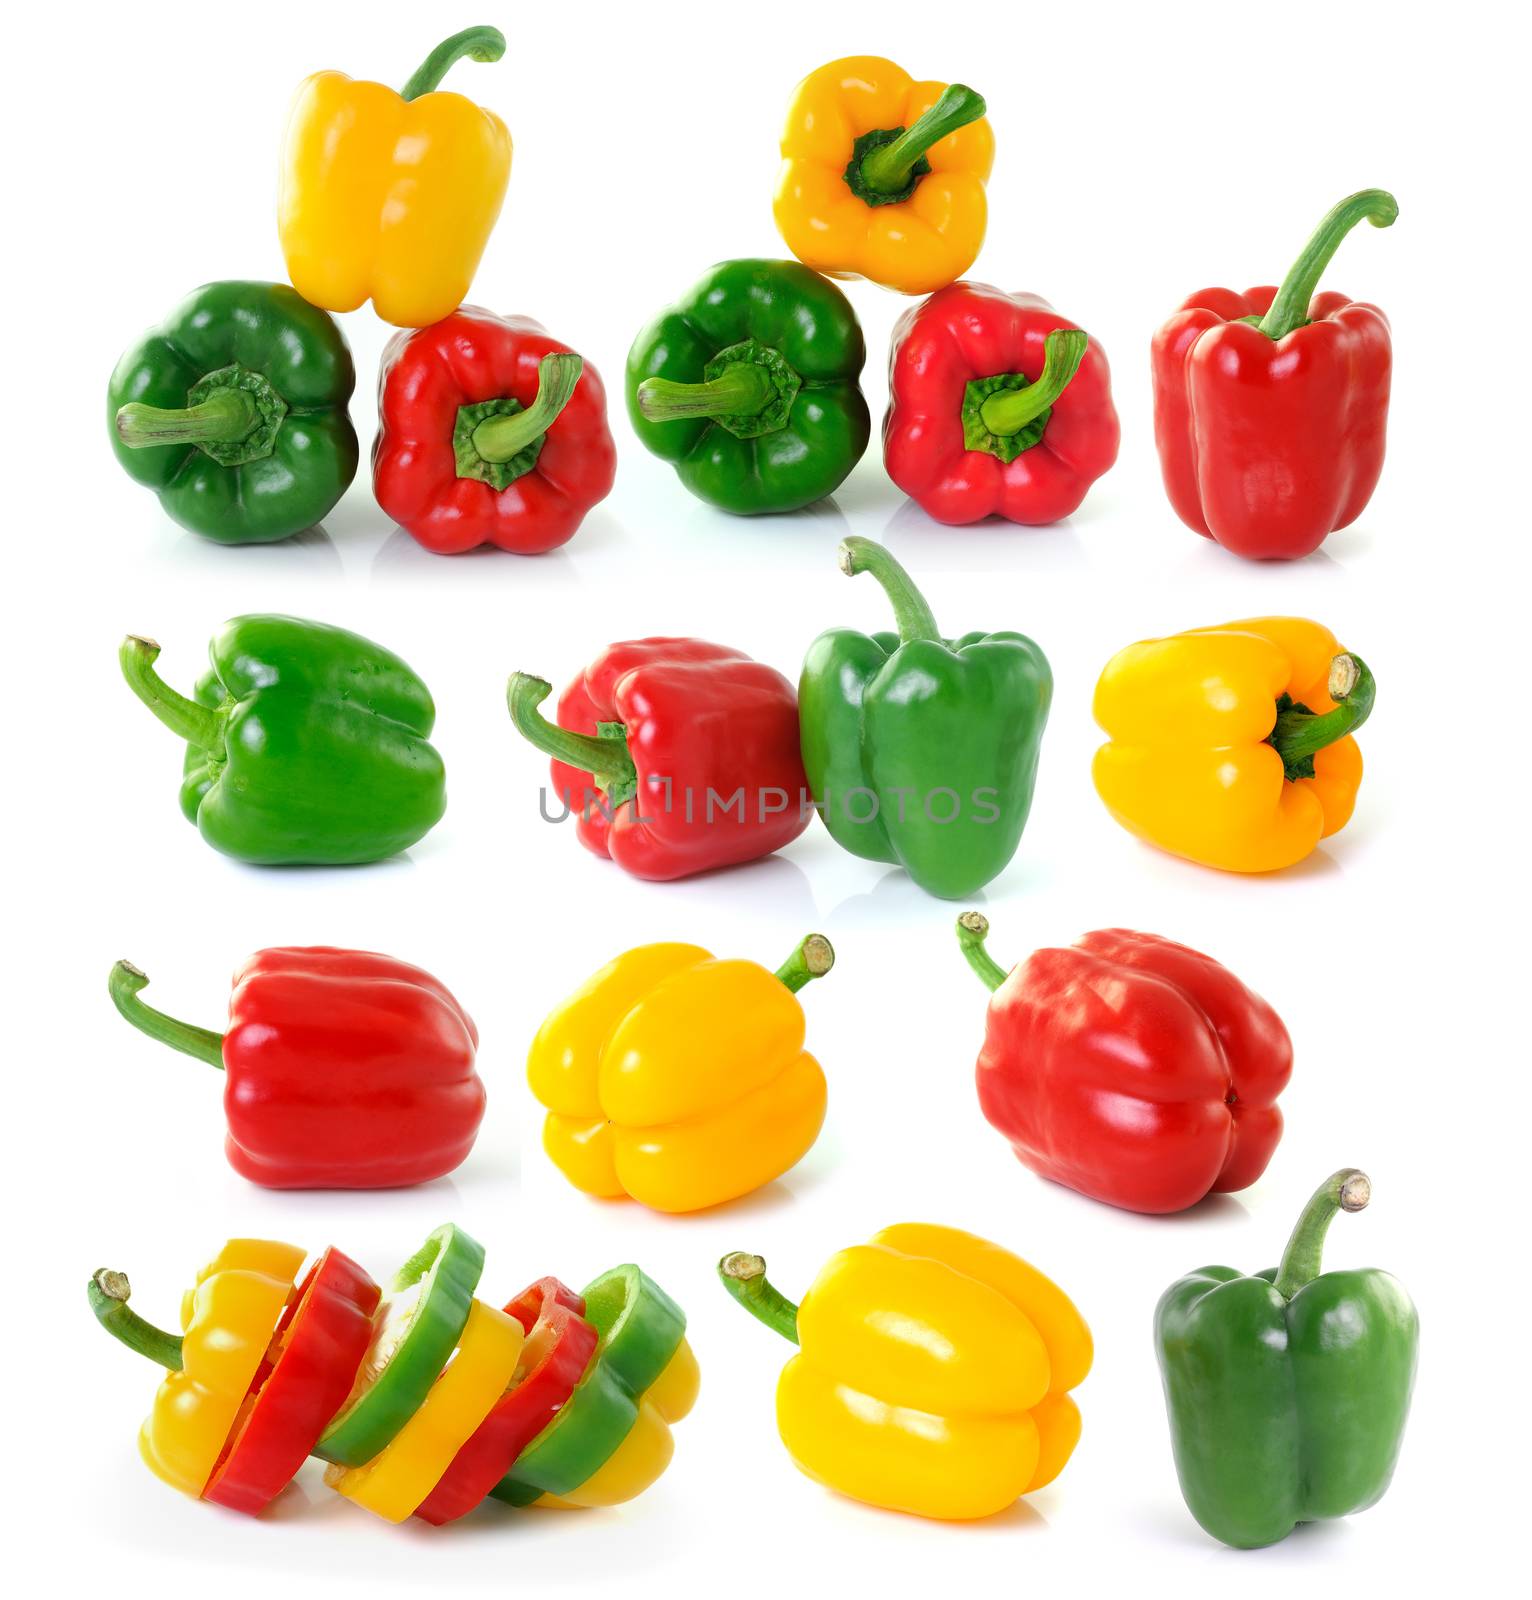 green yellow red pepper on white background by sommai